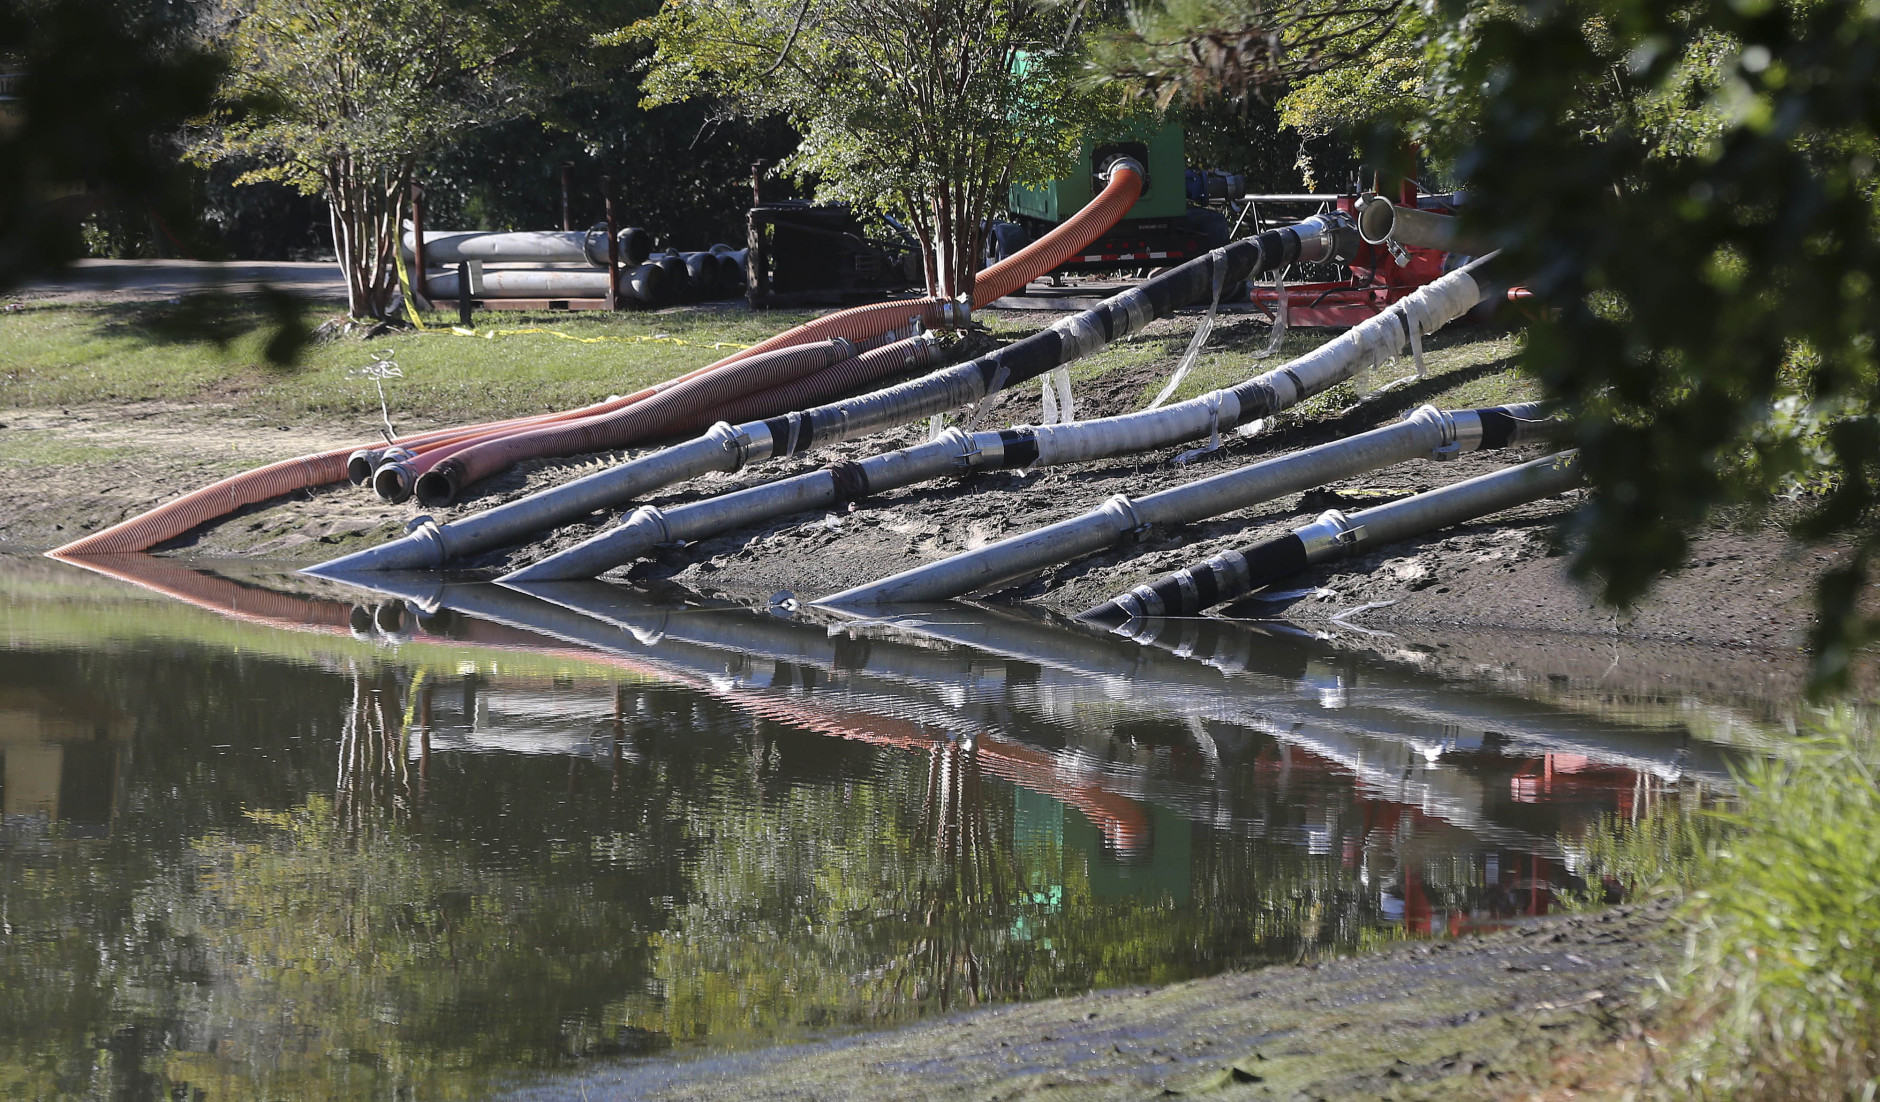 Work crews use an pumps to lower water levels and stabilize a dam at a lake, Wednesday, Oct. 7, 2015, in Columbia, S.C. Heavy rain has caused flooding in parts of the state. (AP Photo/John Bazemore)